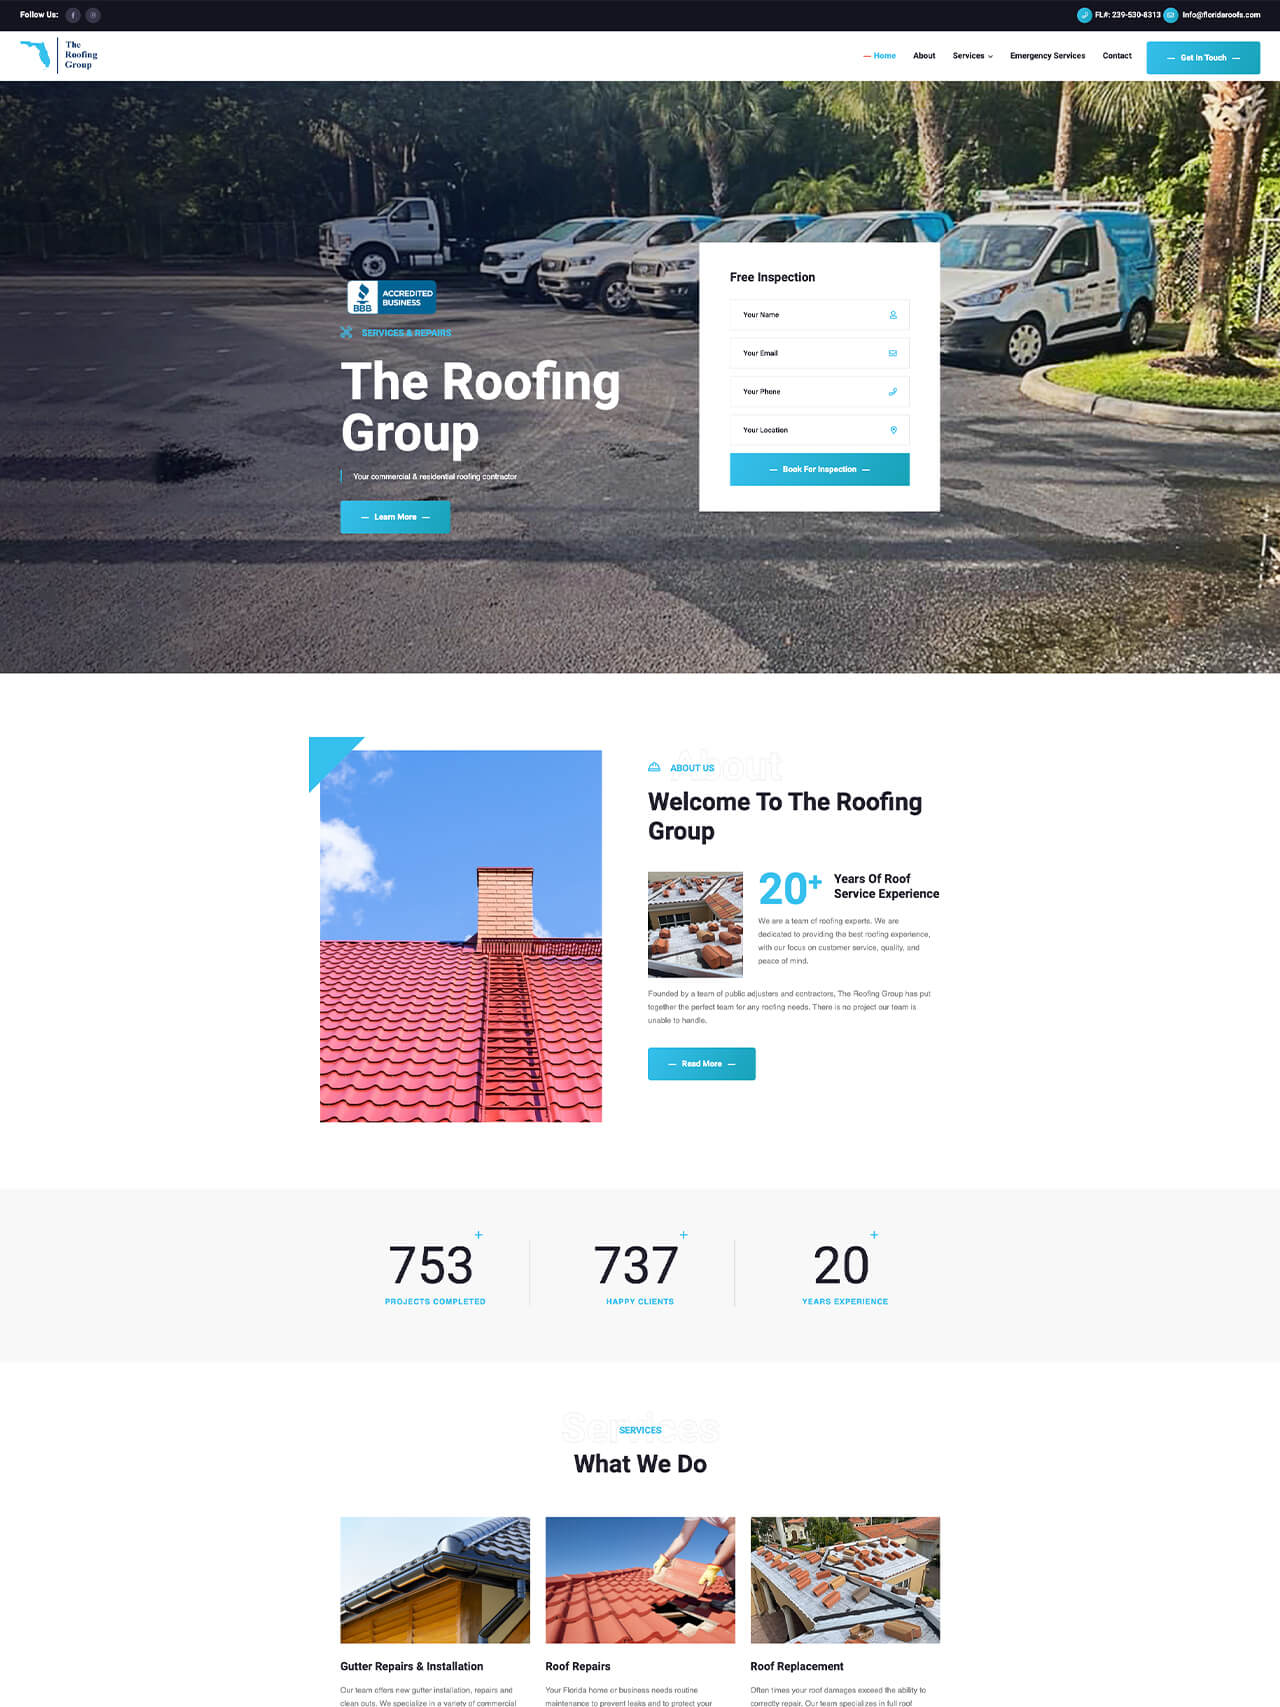 The Roofing Group Website